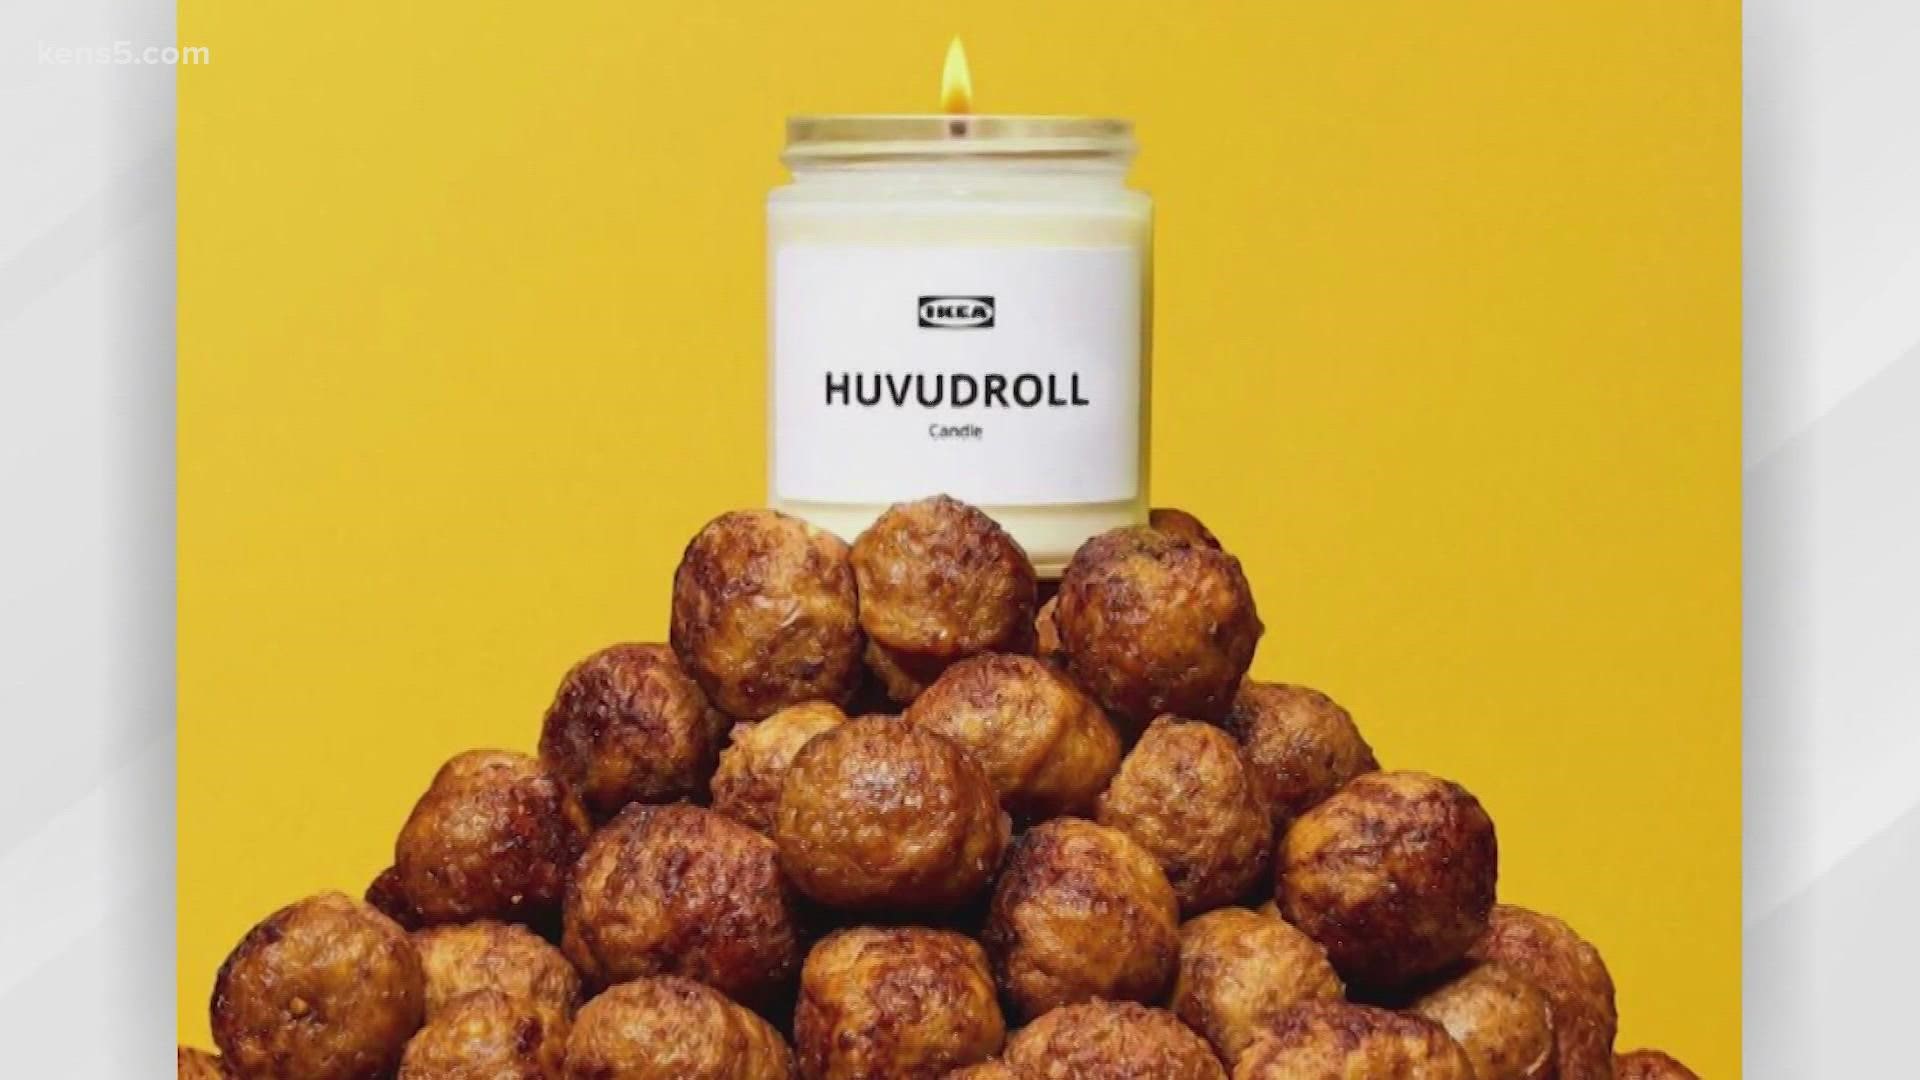 There's nothing better then waking up and lighting a Swedish Meatball candle.